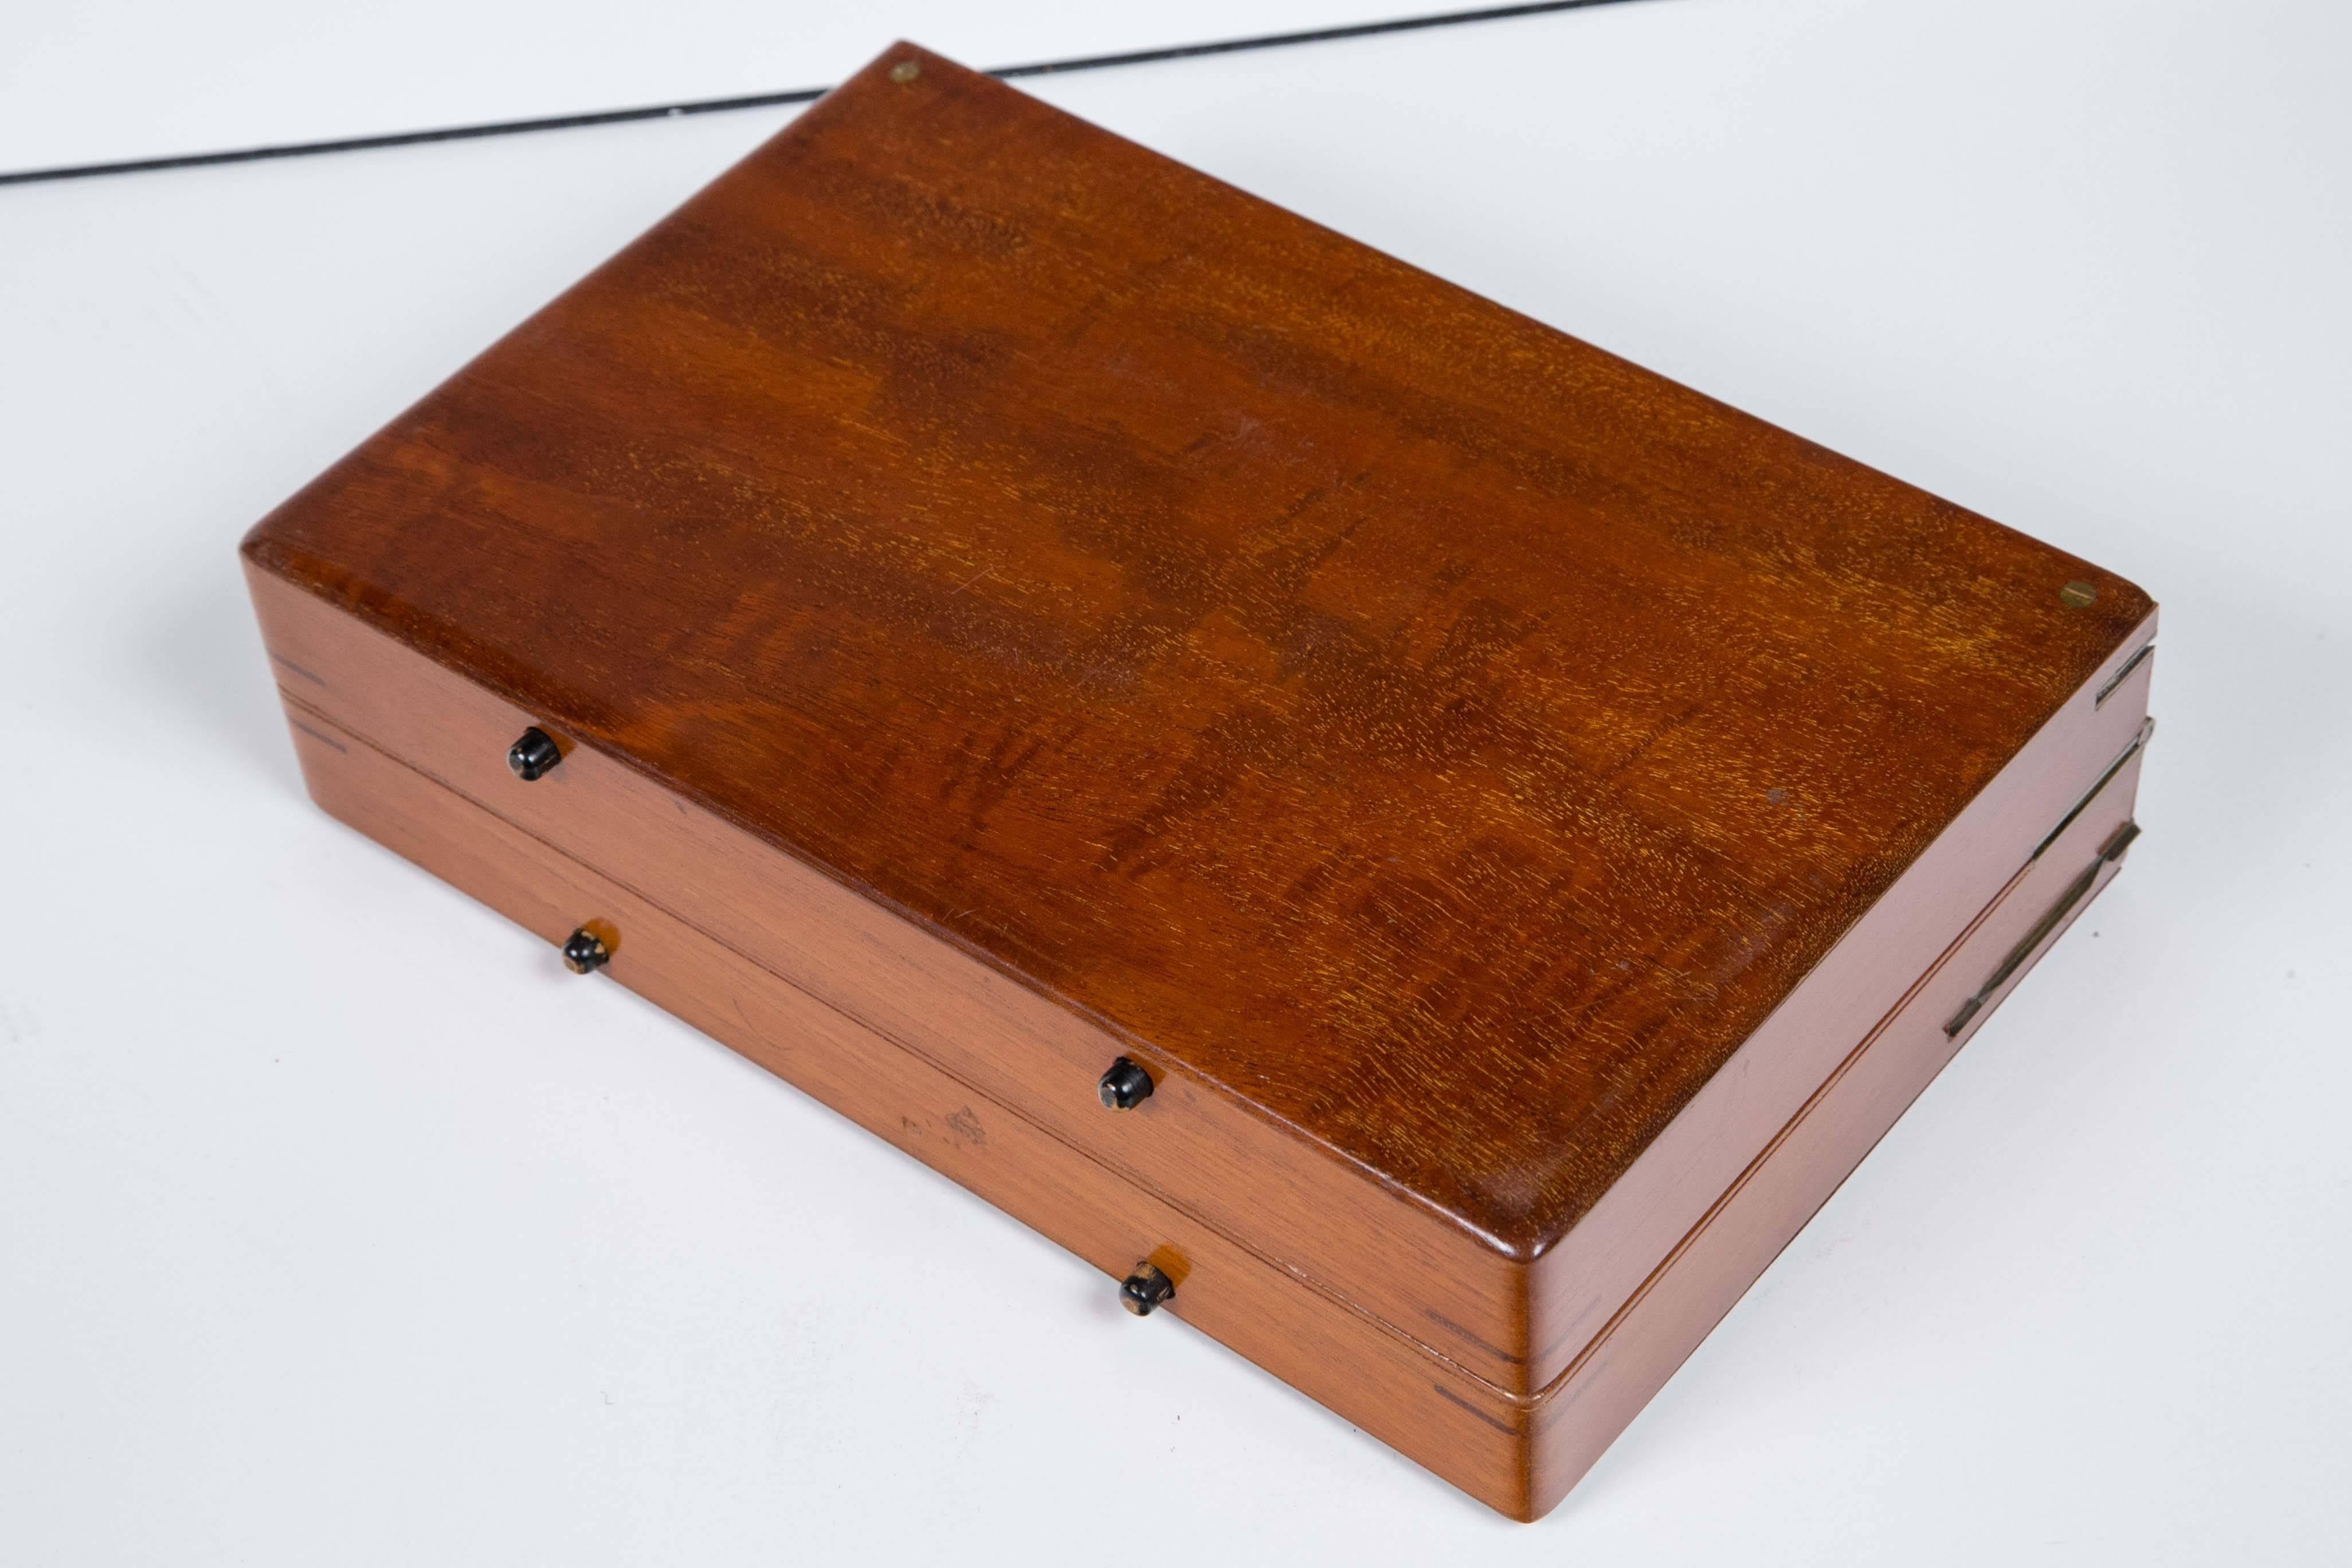 Late 19th Century English 1870 Mahogany Chess Game Signed Jaques, London